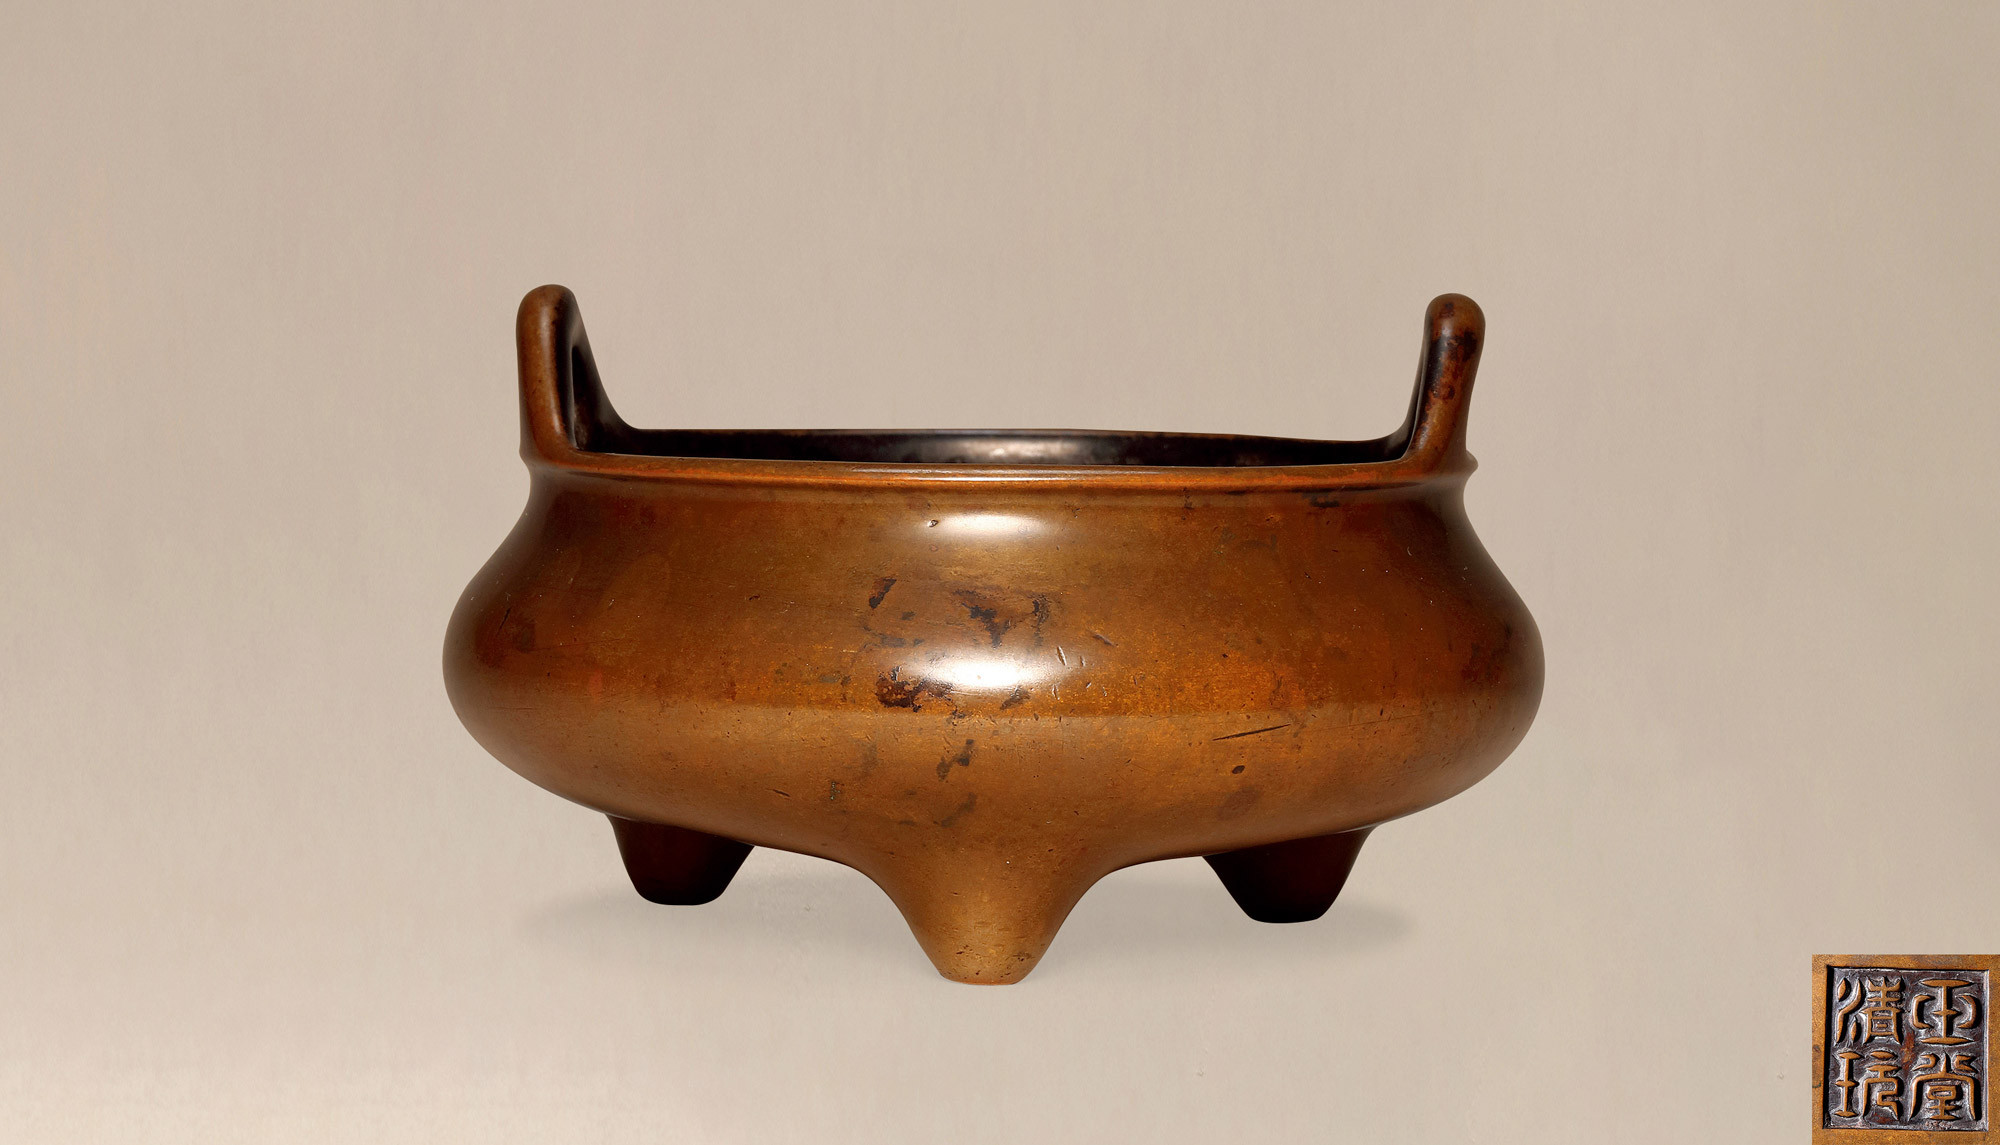 A RARE BRONZE CENSER WITH UPRIGHT LOOP HANDLES